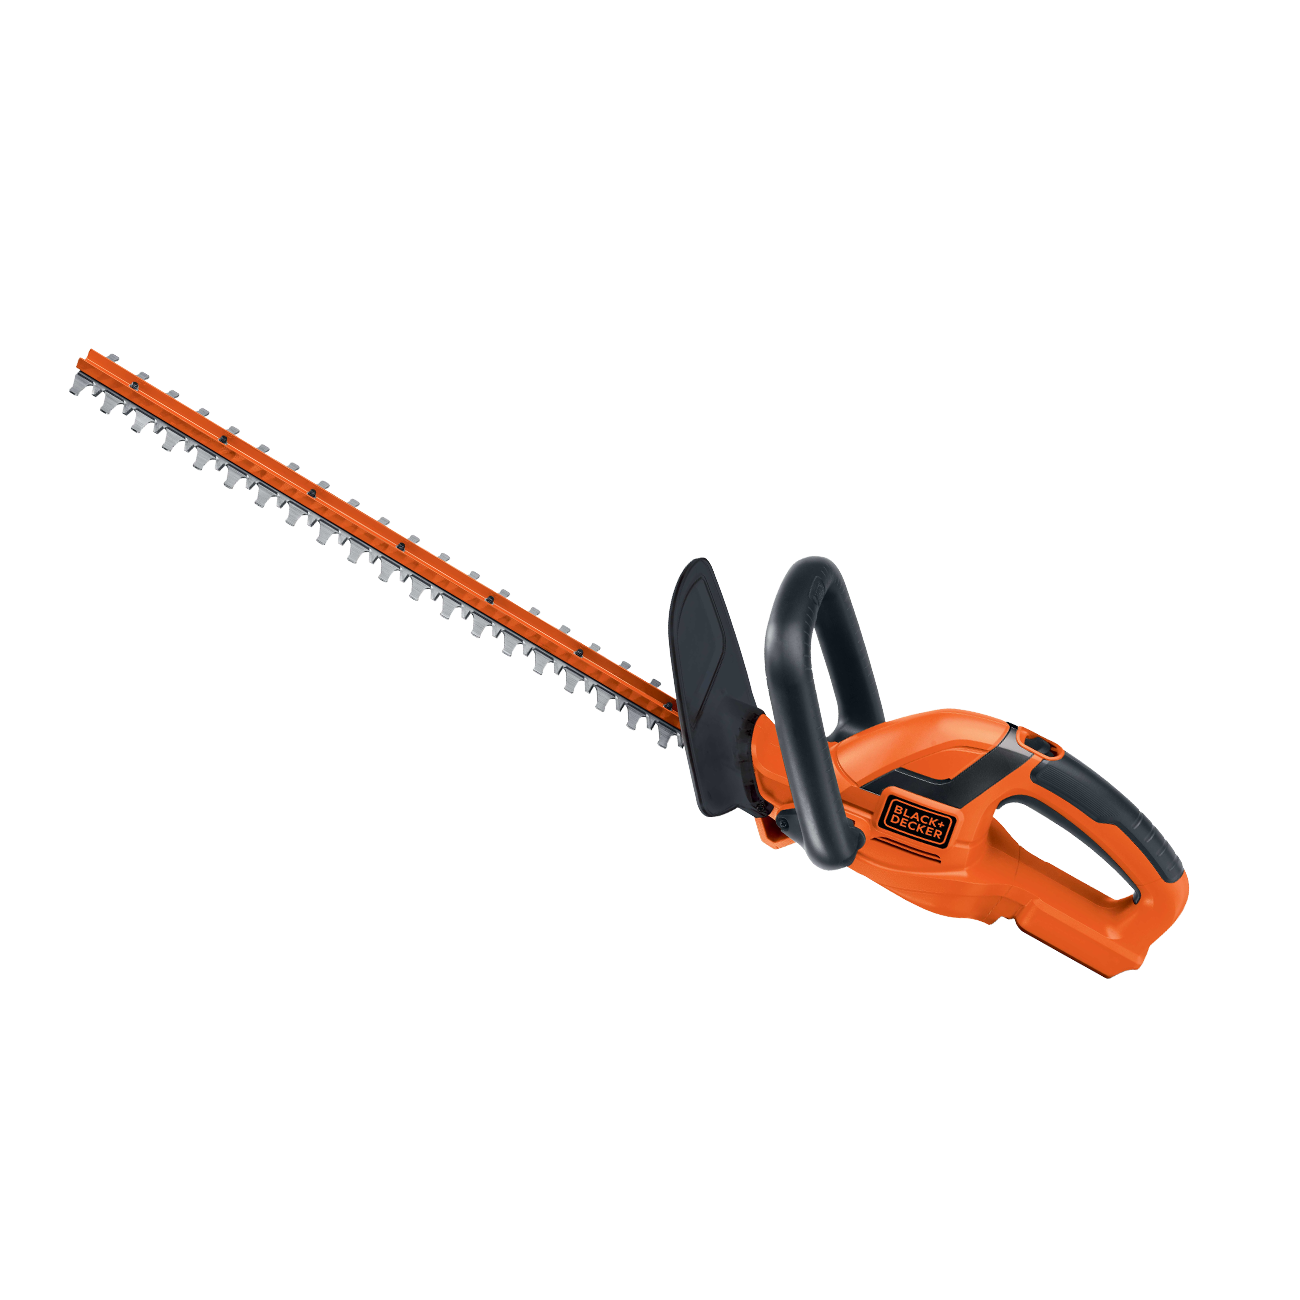 20V Max* Cordless Hedge Trimmer, 22-Inch, Tool Only